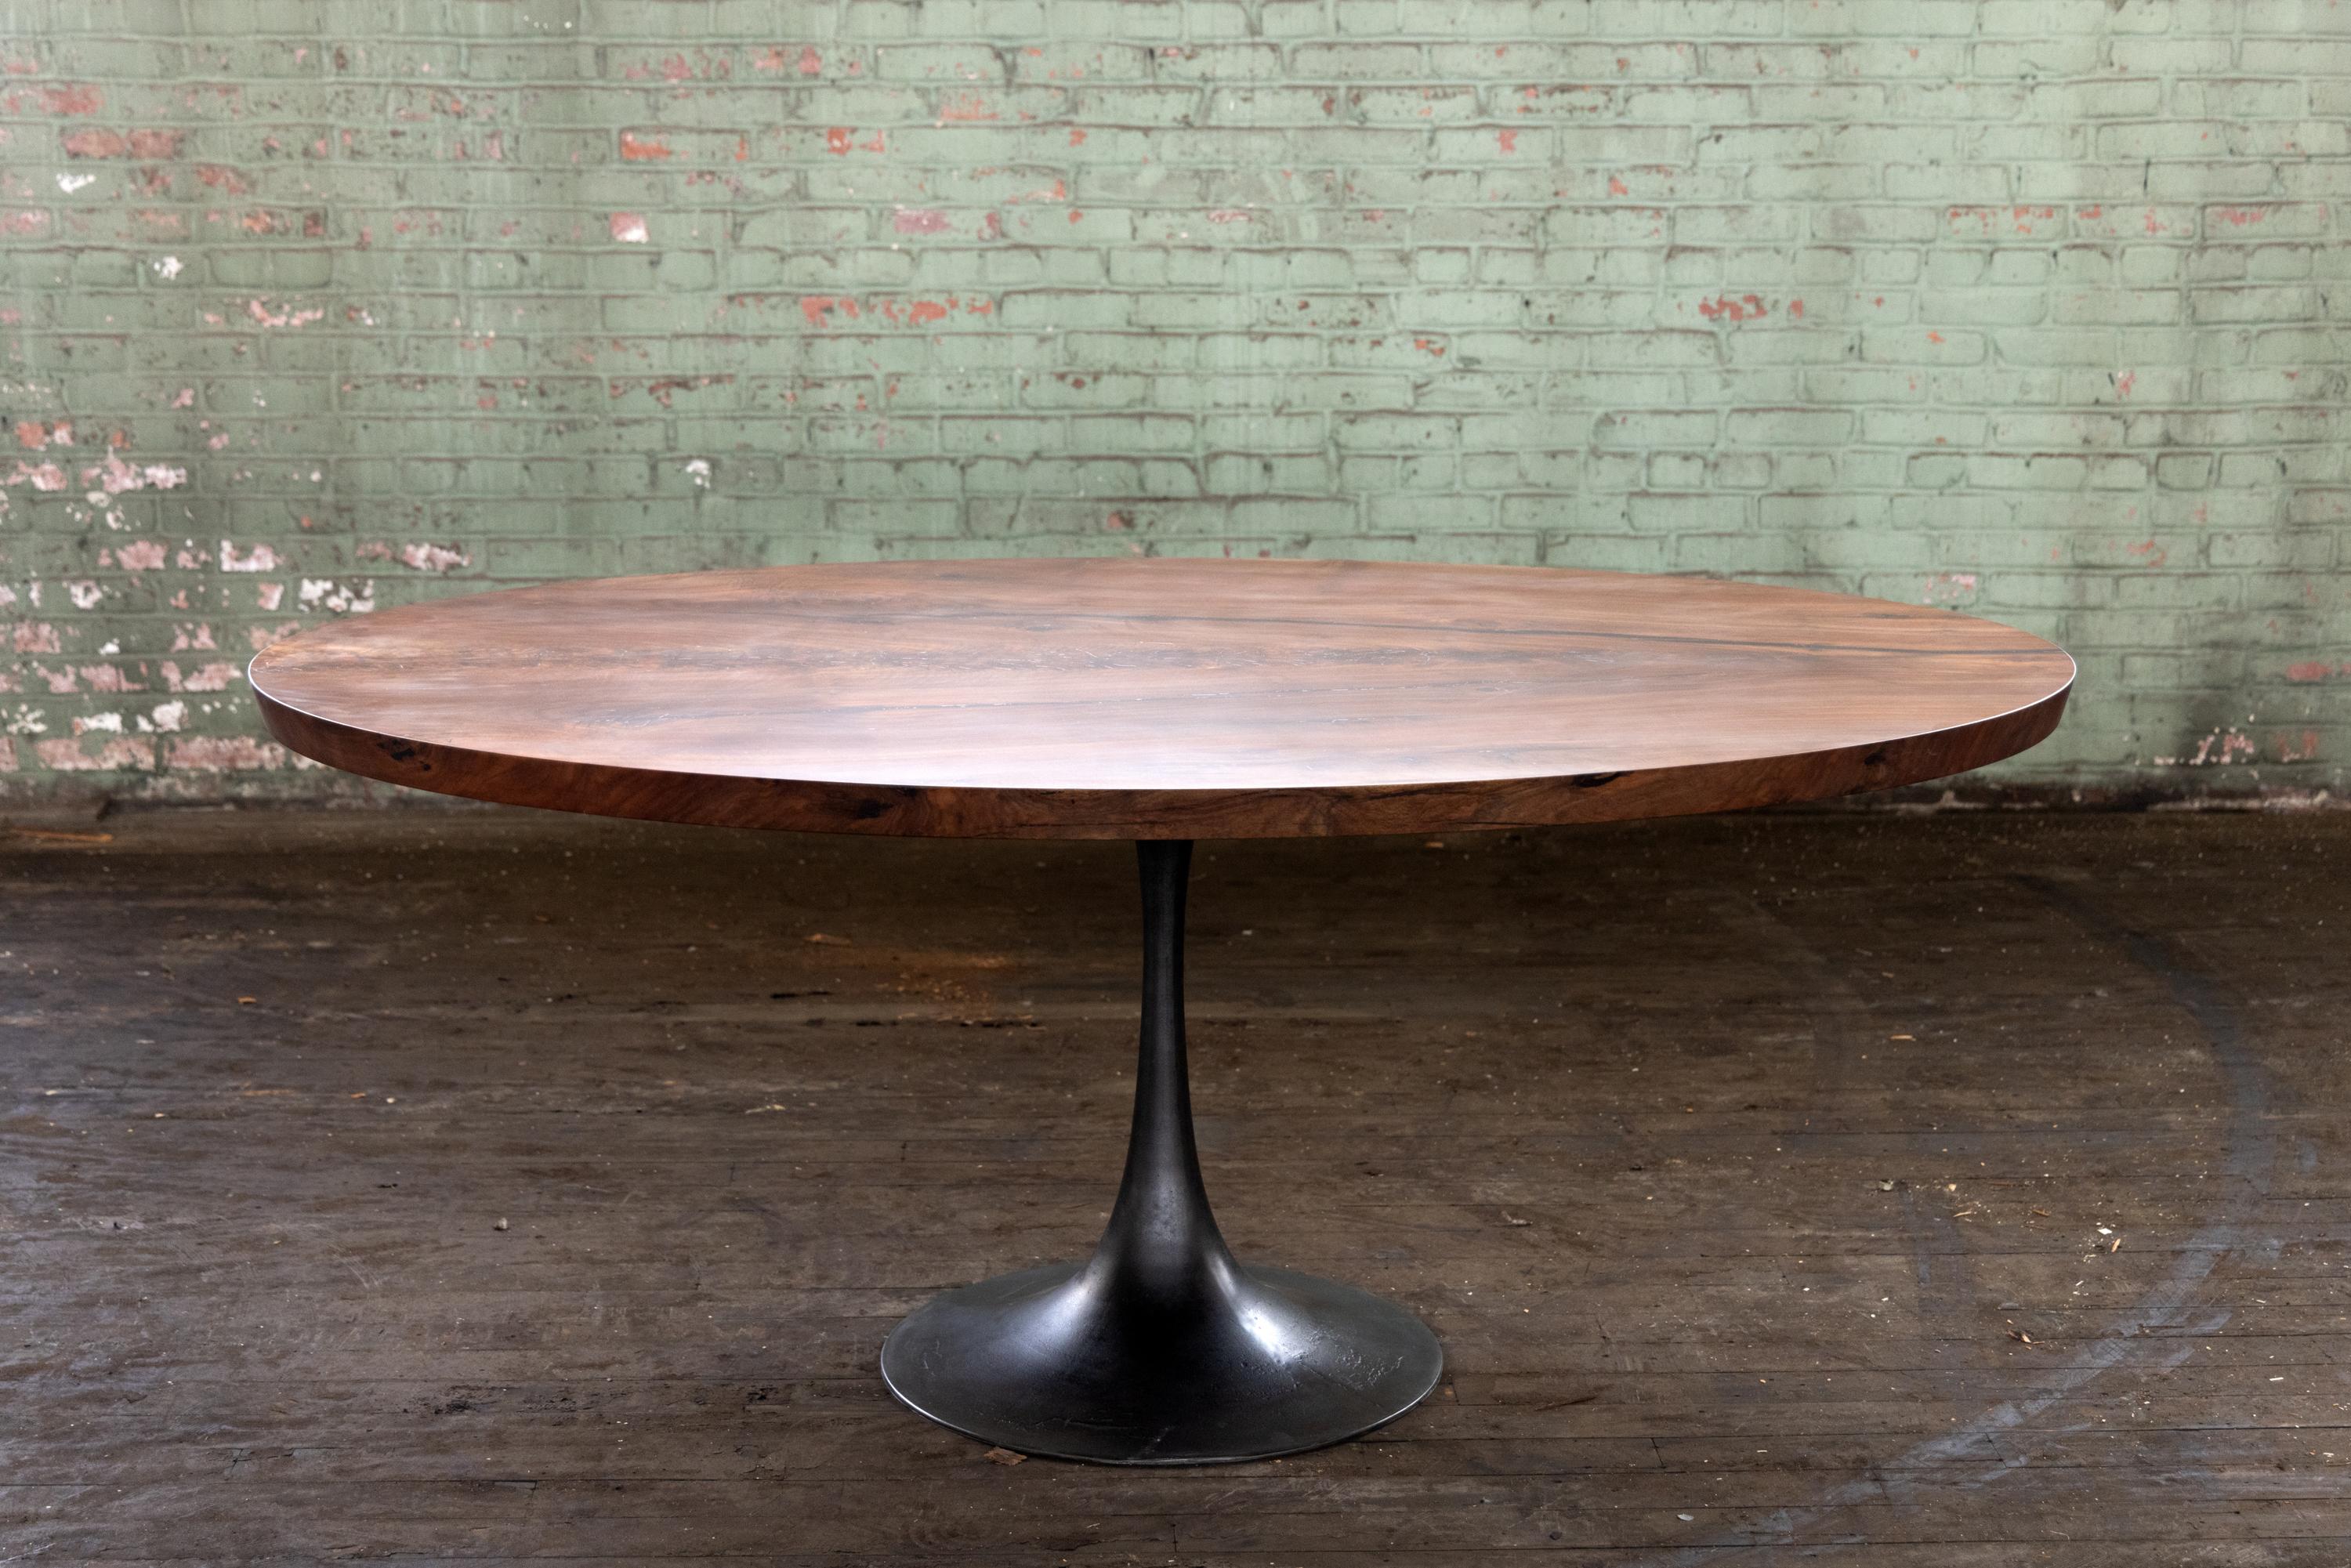 The Amicalola base captures the room set against an oval table top. This pedestal base is hand cast by the artisans at Sloss Furnaces historic foundry in Birmingham to look beautiful and function out of the way of diner's feet. Rich with Mid-Century